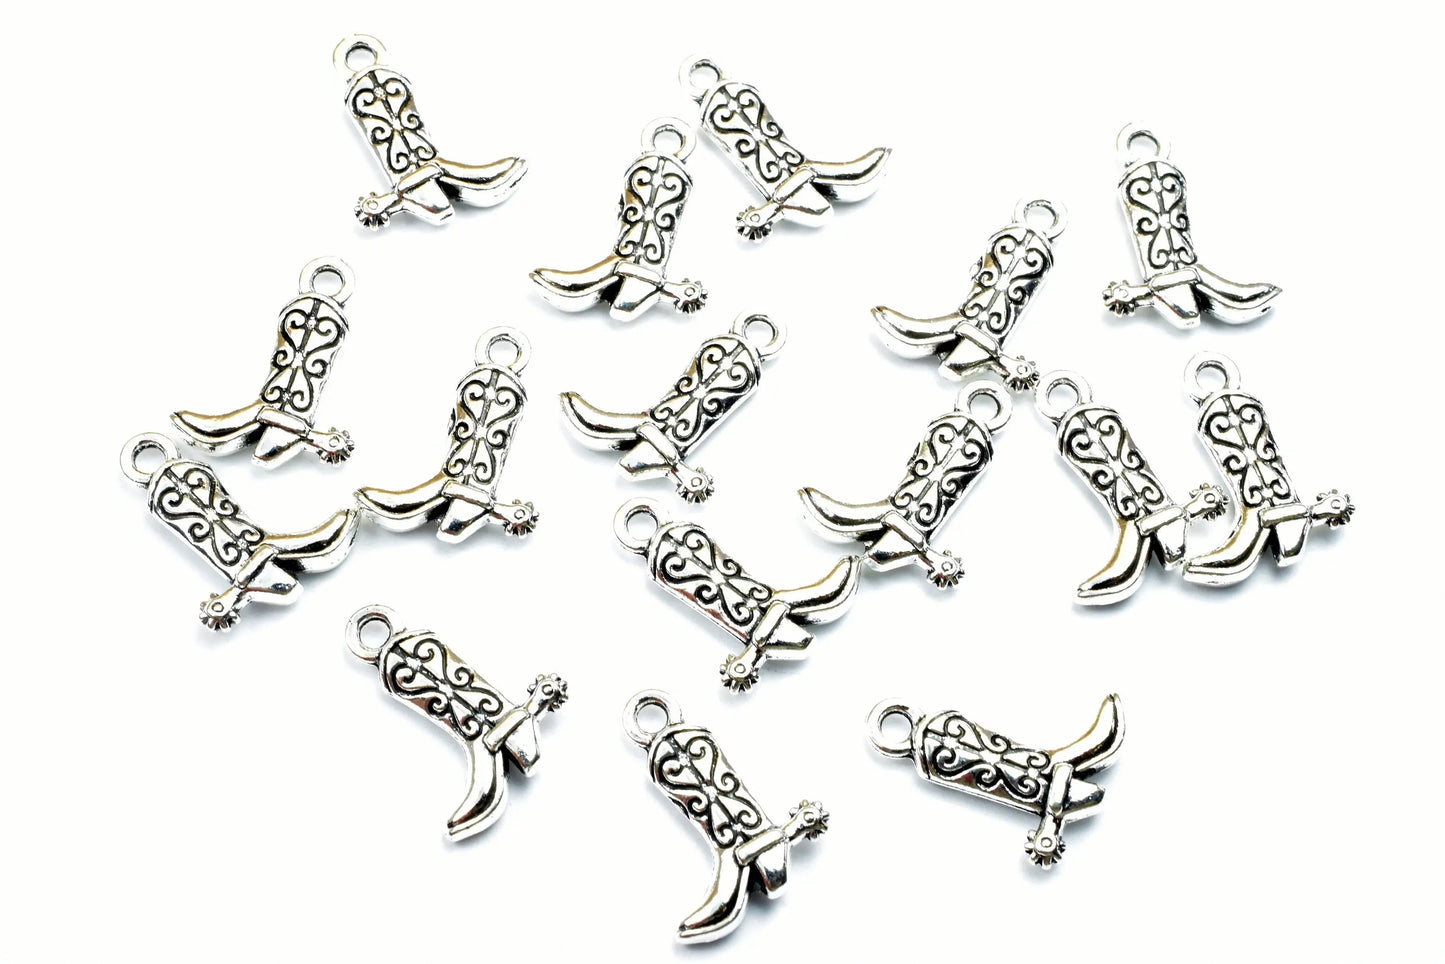 Cowboy Boots Charm Pendant Beads Silver Size 17x13mm Decorative Design Metal Double Face Finding Beads for Jewelry Making 14PCs/PK - BeadsFindingDepot